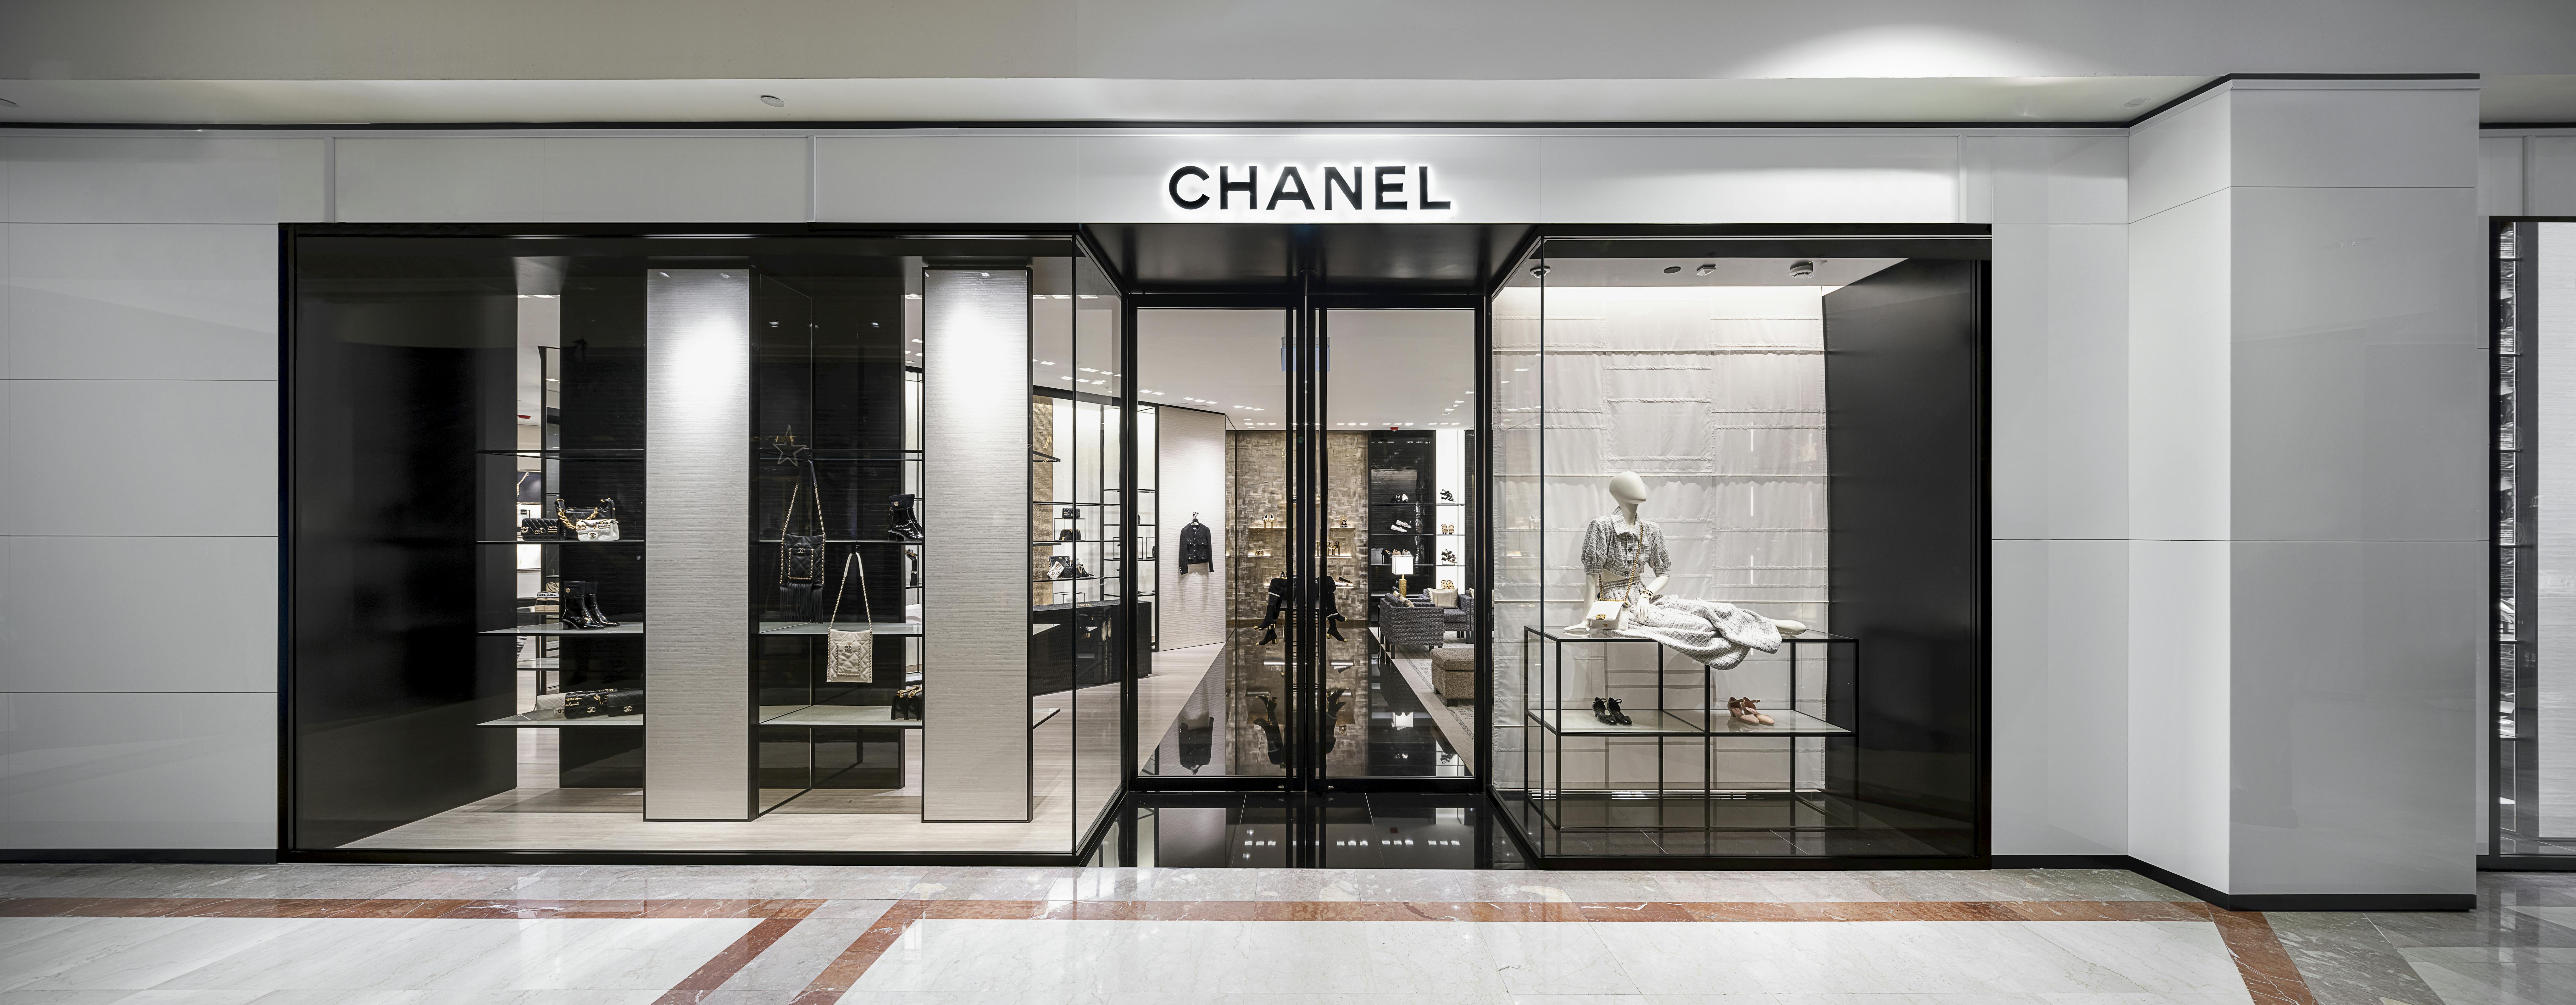 Chanel's Refashioned Boutique Showcases the Best of its Latest